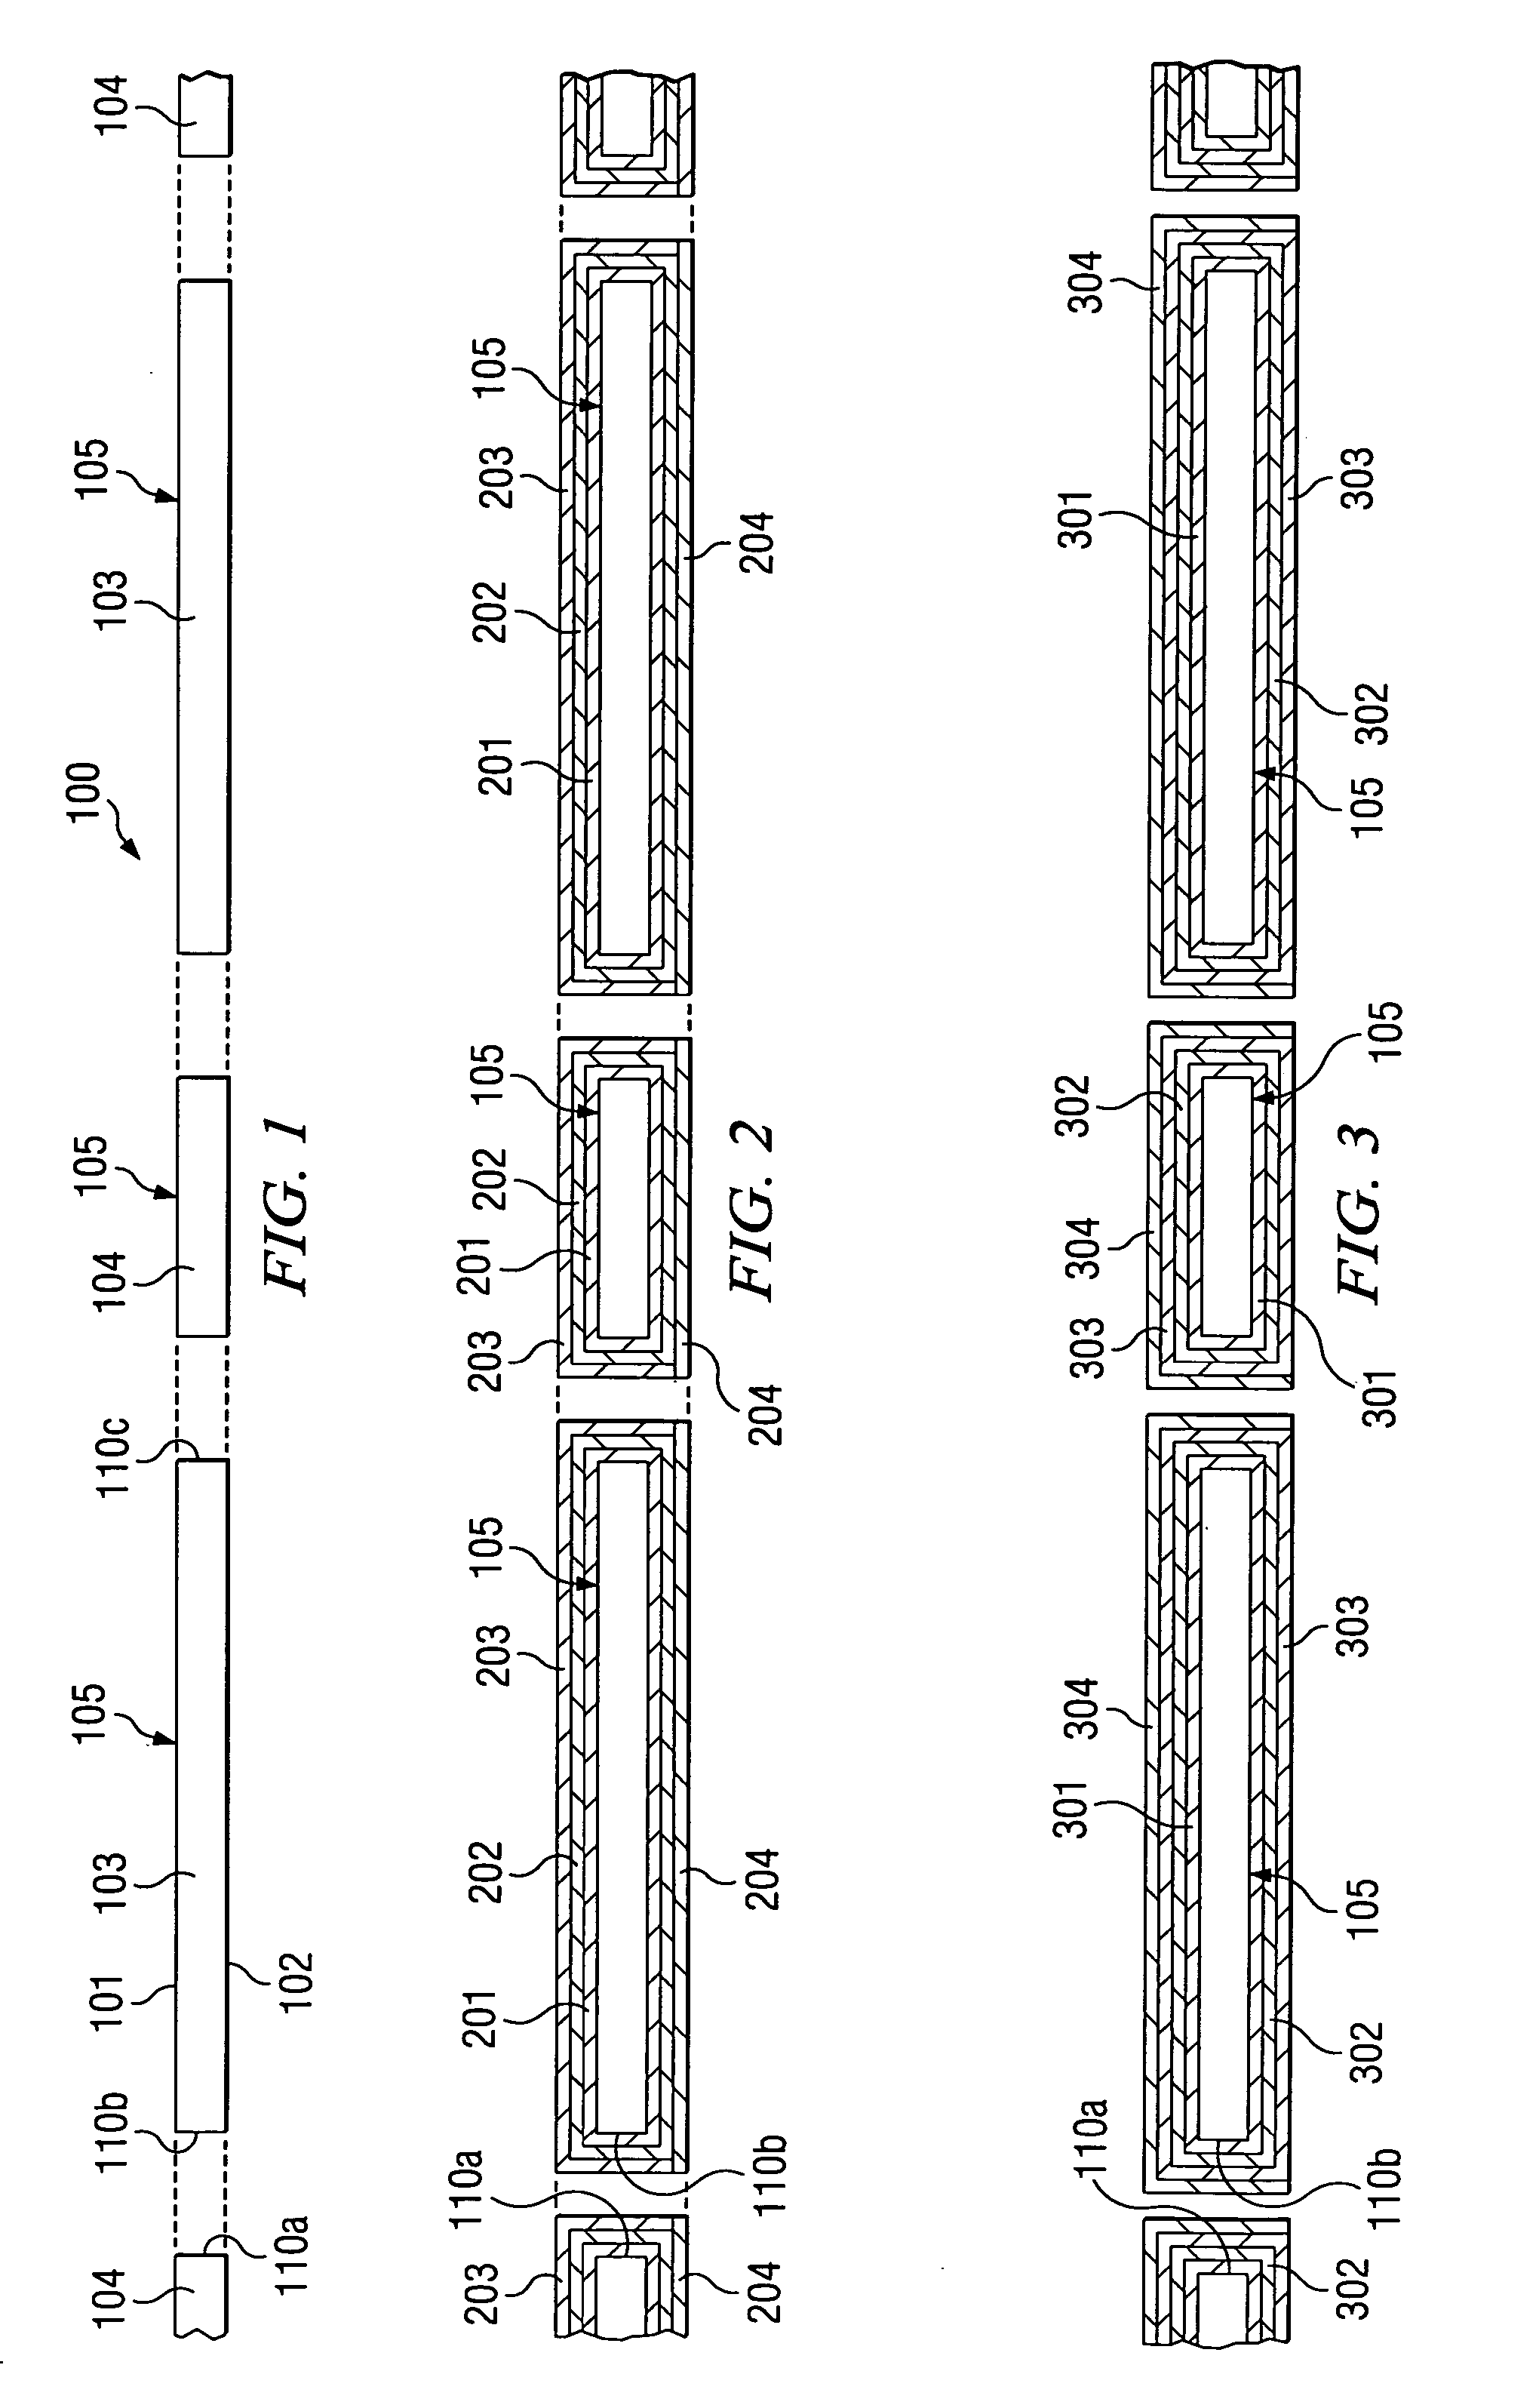 Semiconductor package having improved adhesion and solderability